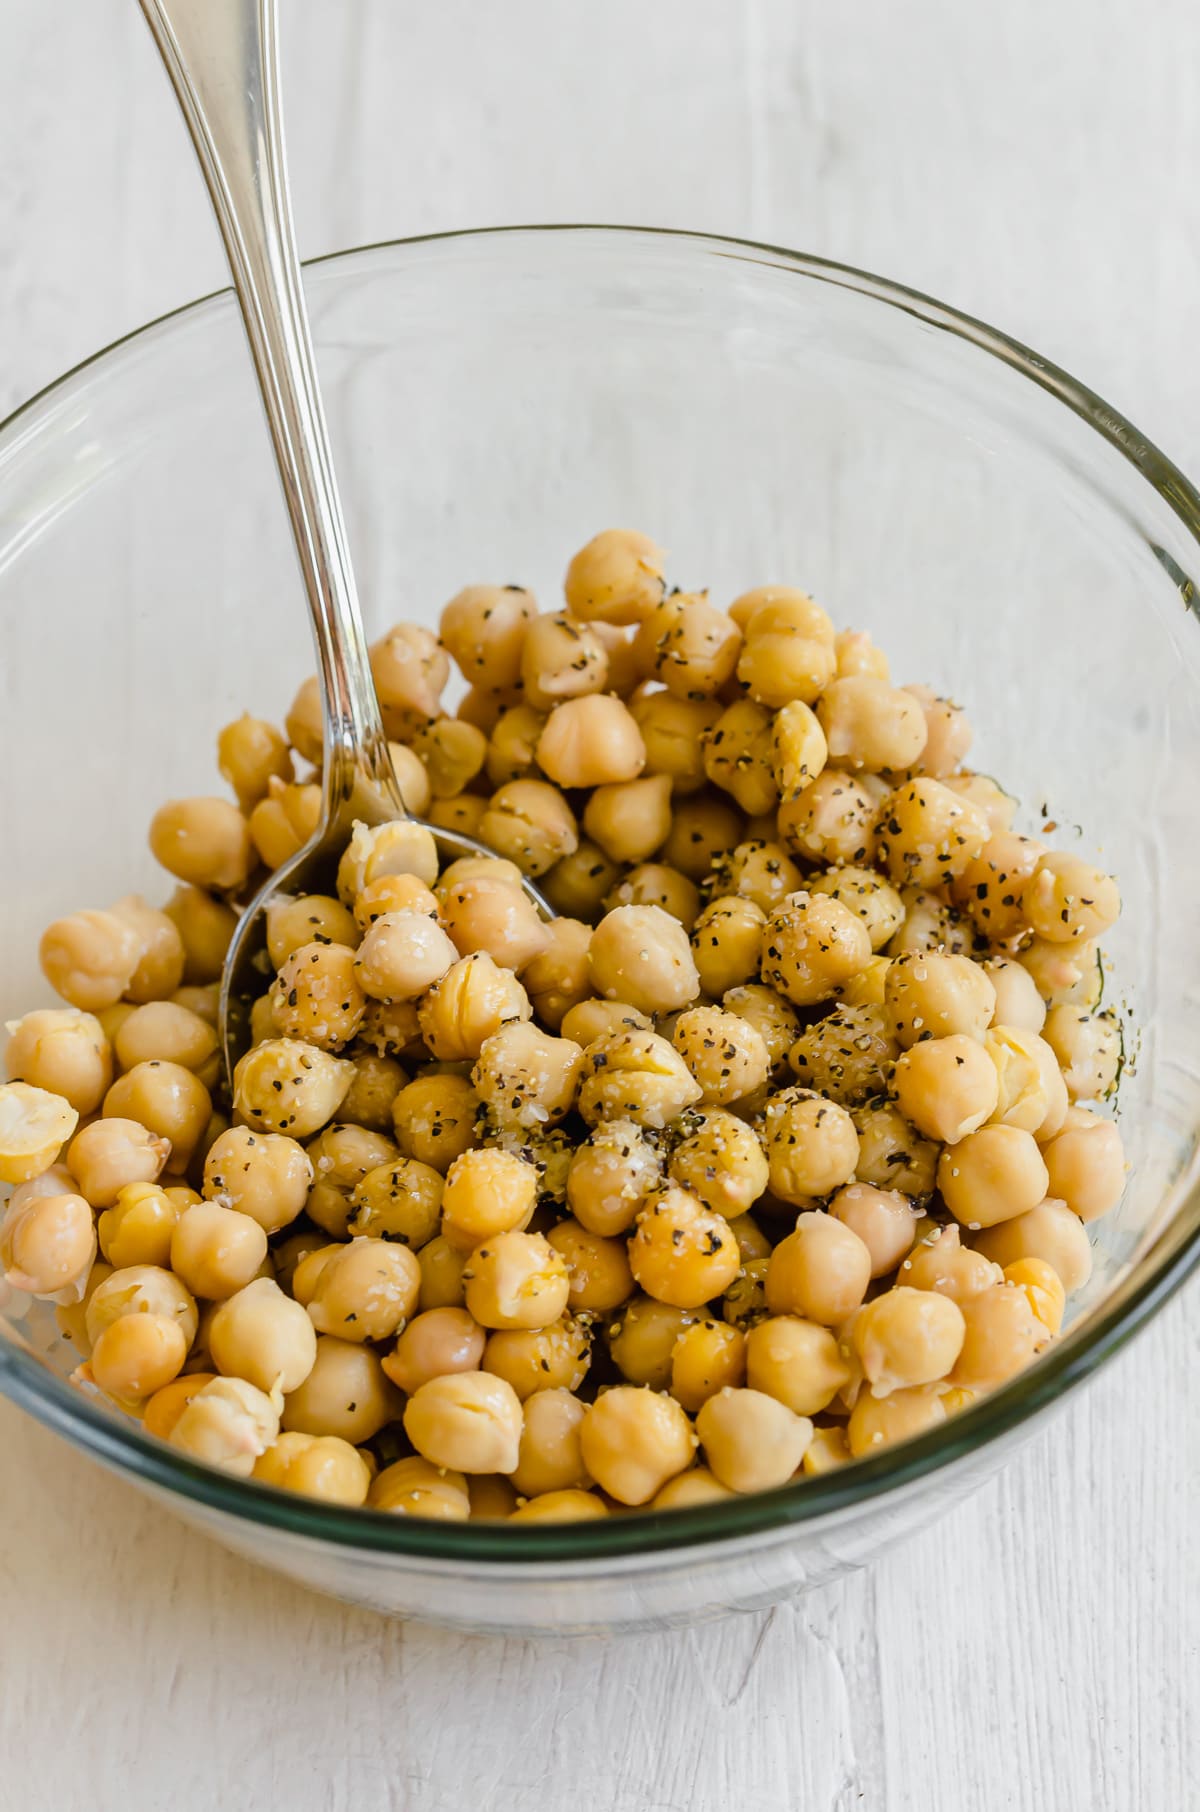 Chickpeas being tossed with oil and seasonings in a glass bowl.